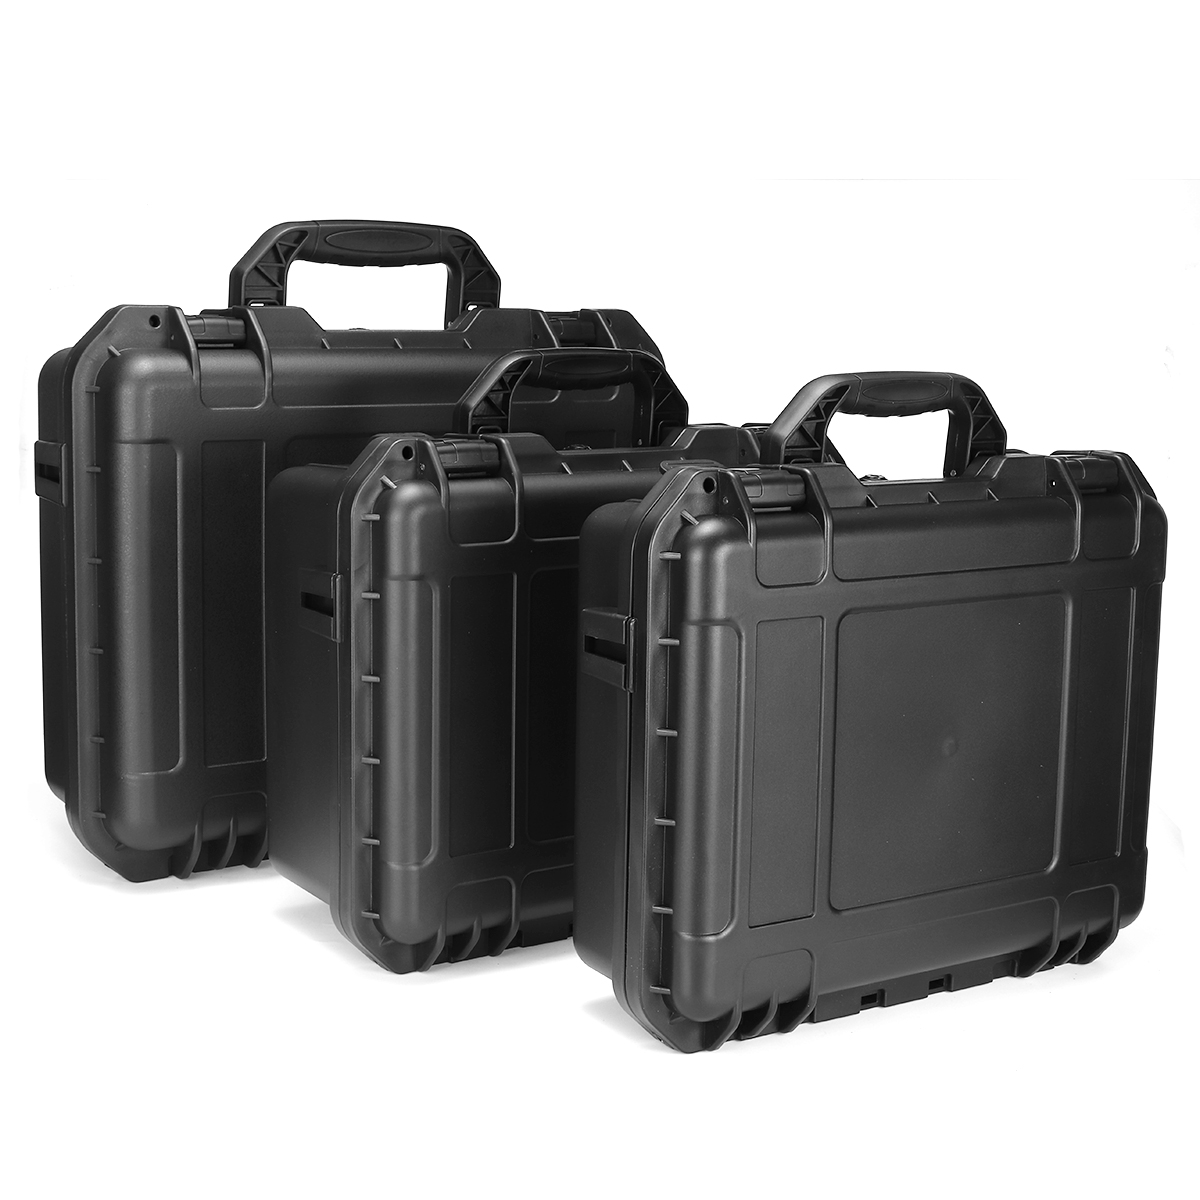 1PC-Shockproof-Sealed-Safety-Case-Toolbox-Airtight-Waterproof-Tool-Box-Instrument-Case-Dry-Box-with--1915433-1